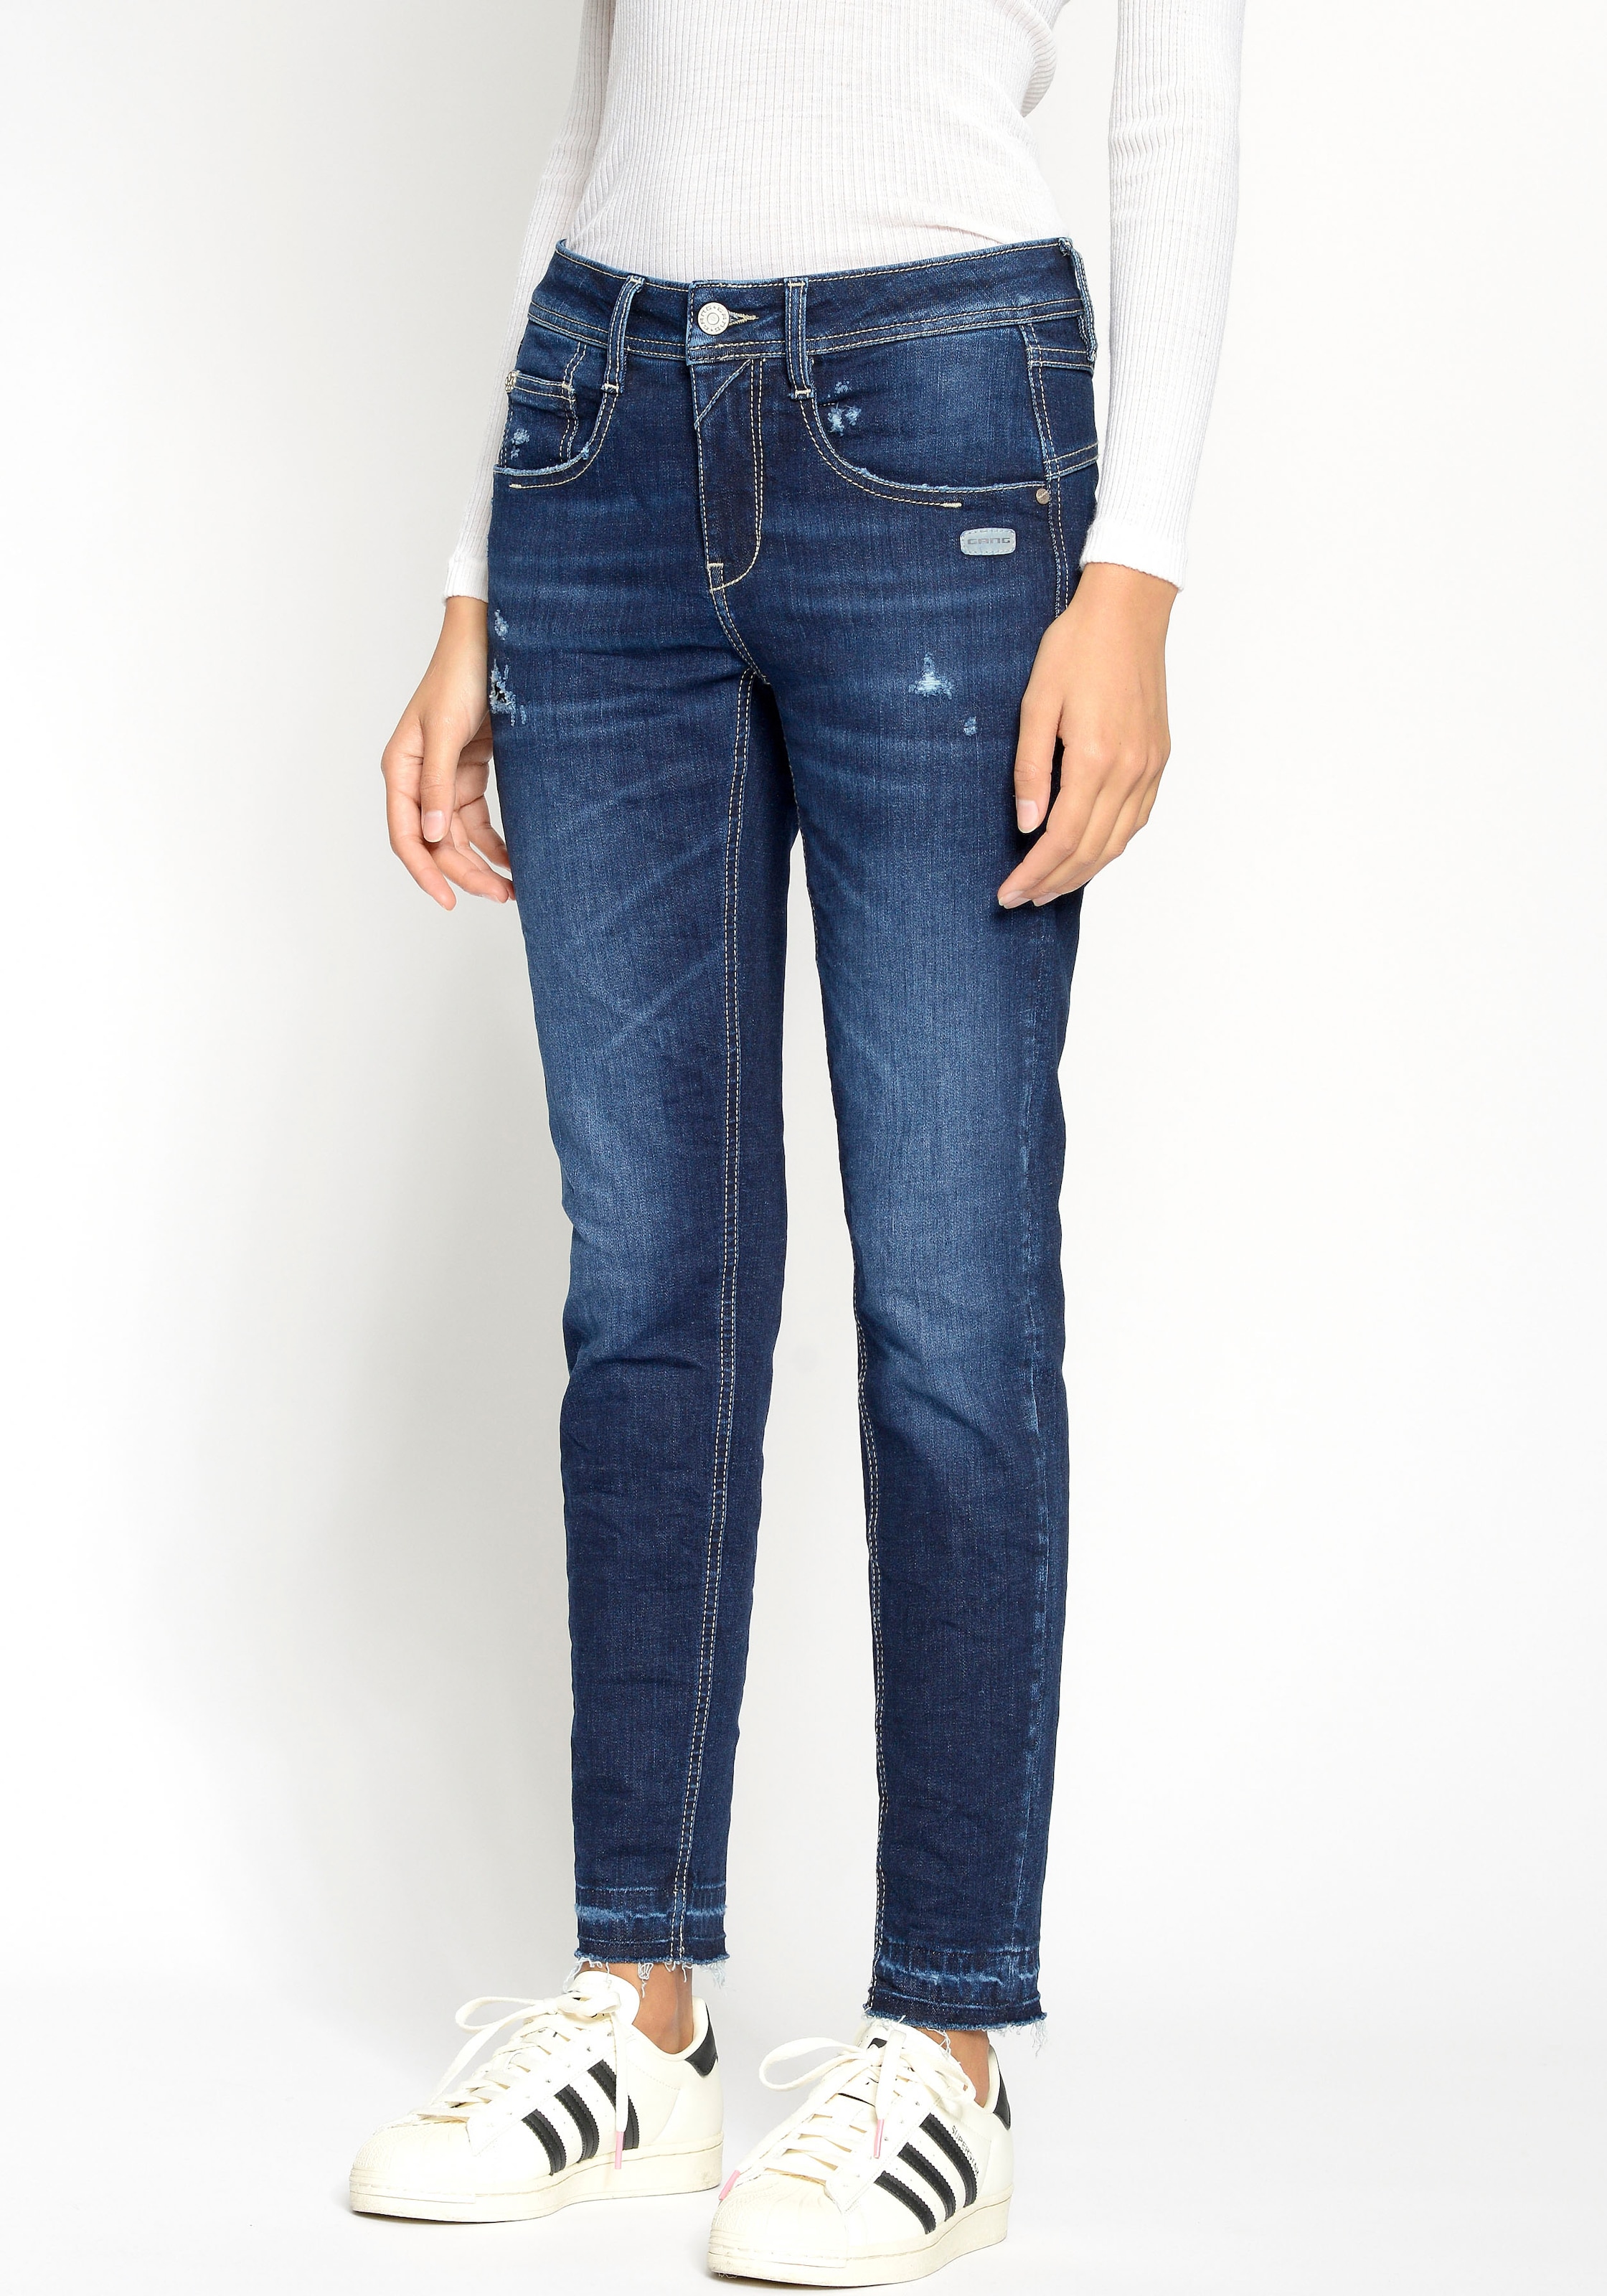 OTTO GANG »94Amelie kaufen Relax-fit-Jeans bei Cropped«